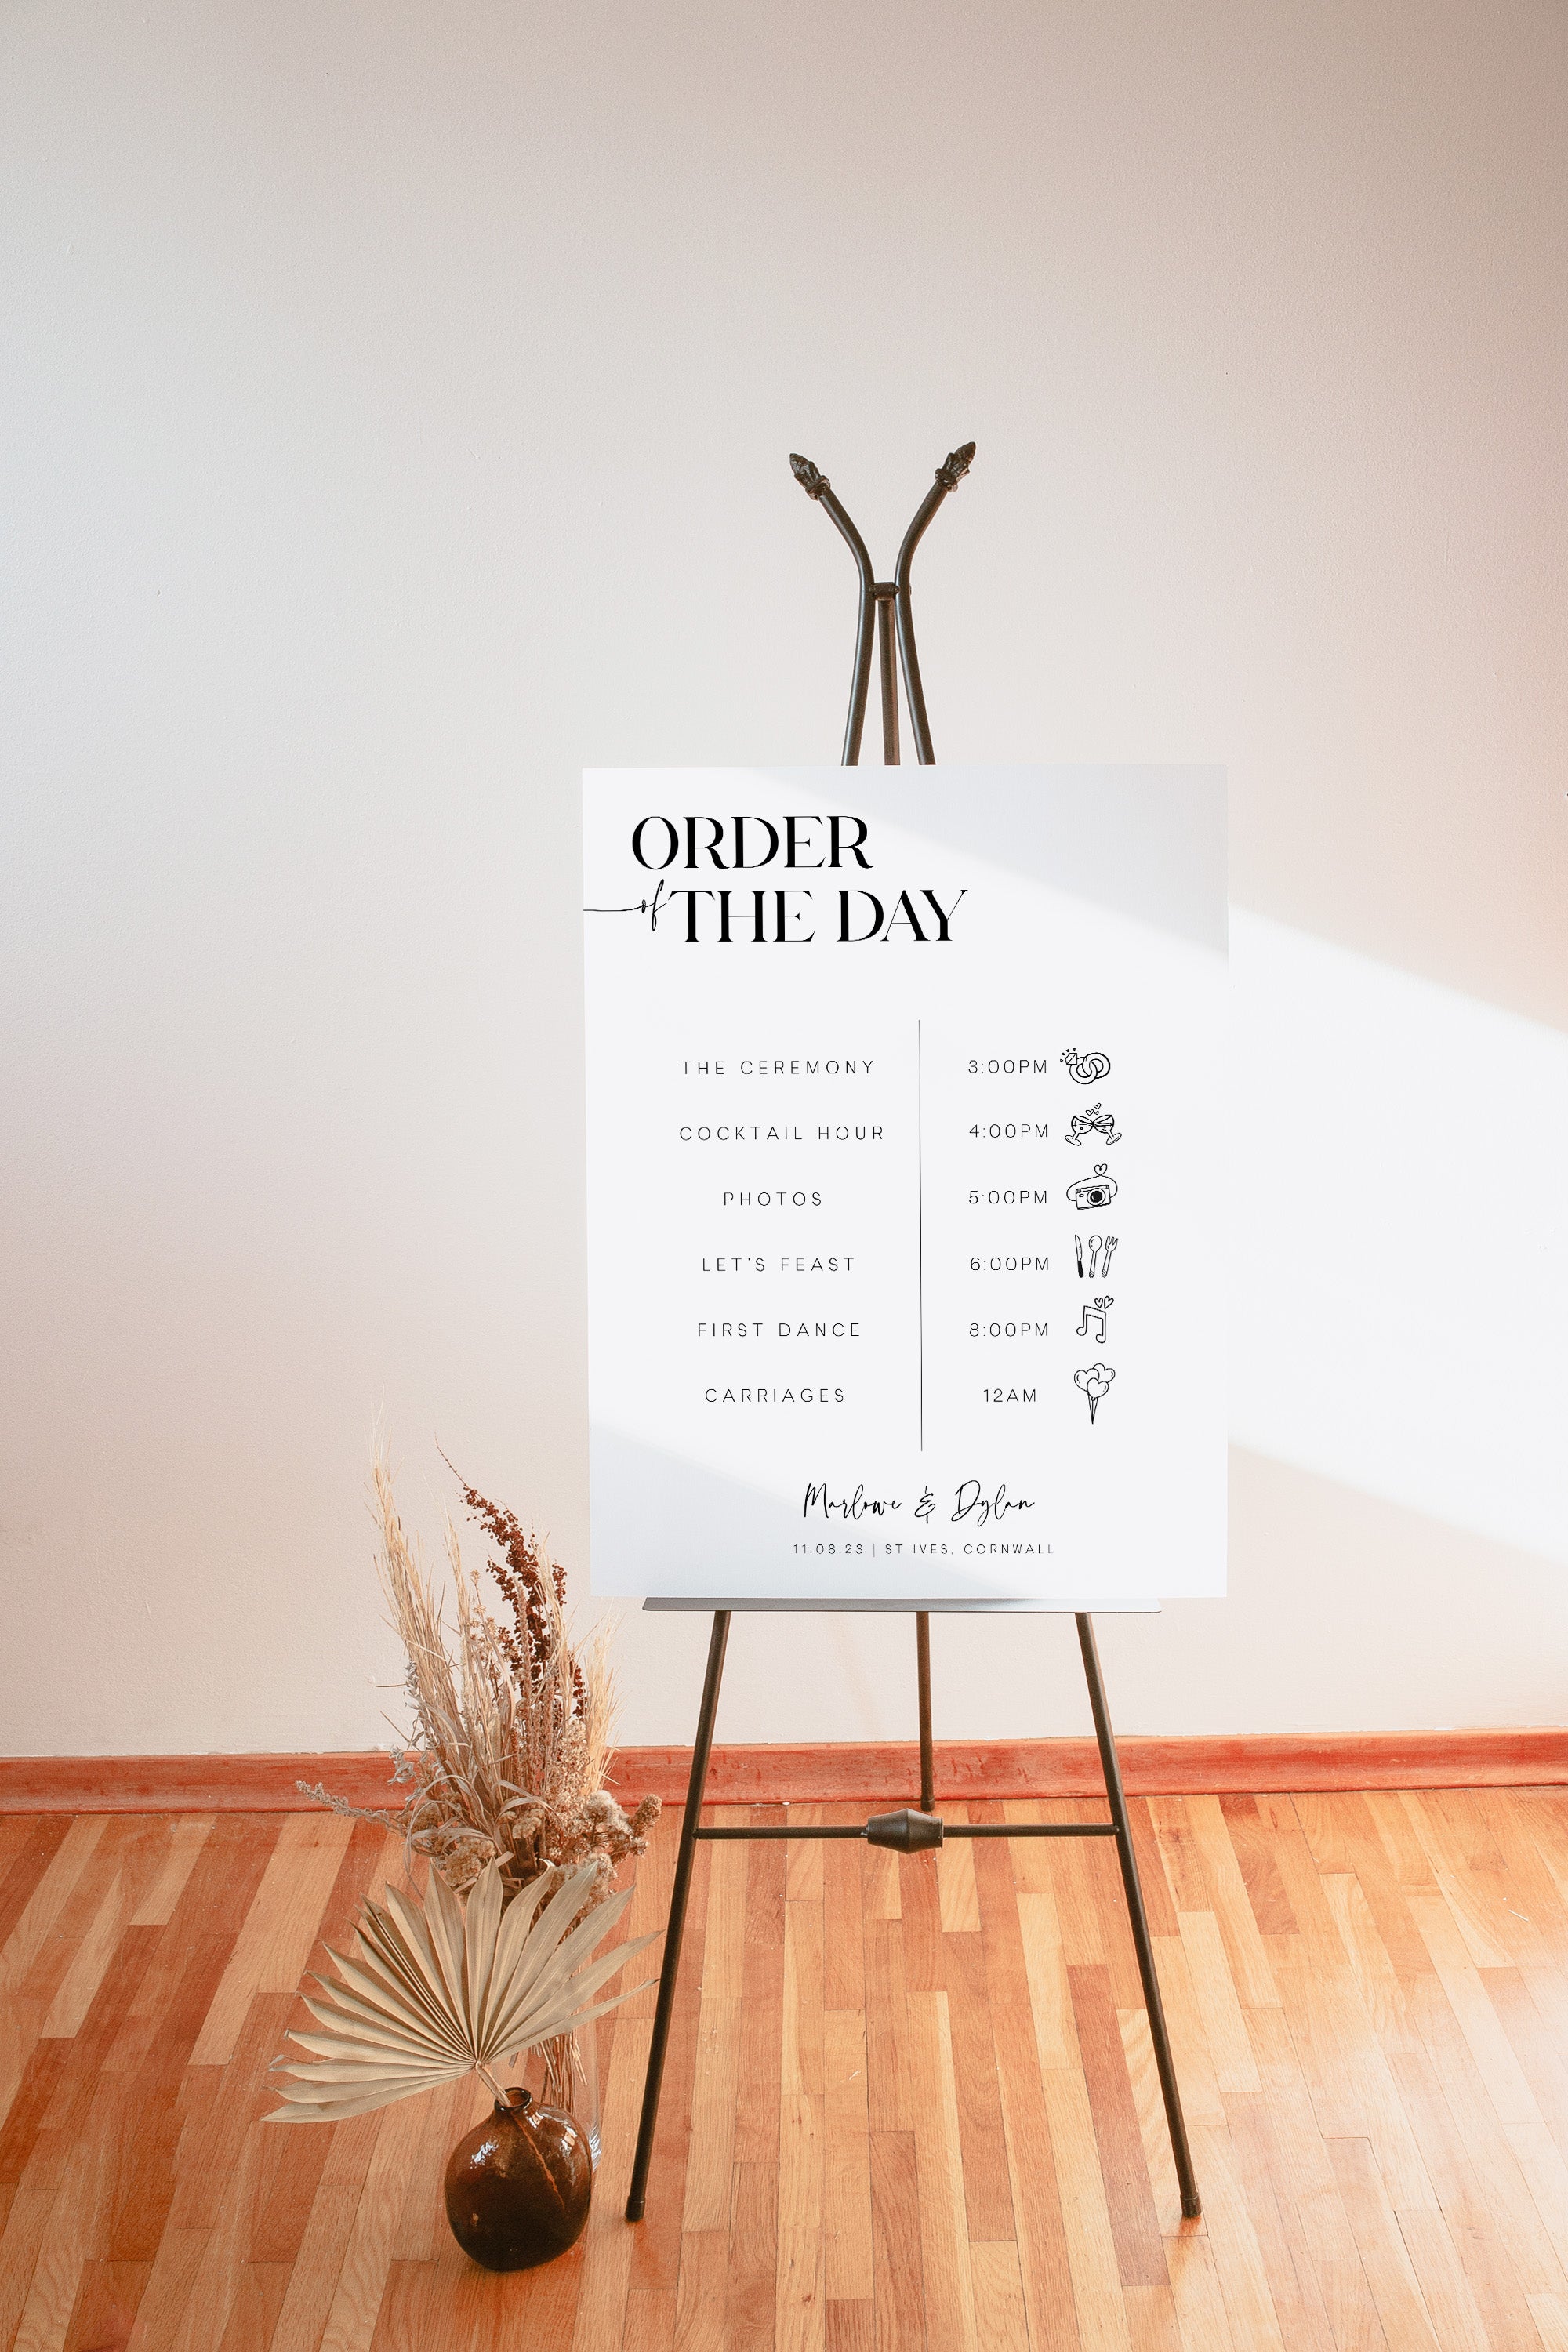 editable order of the day sign, wedding order of the day sign, printable wedding stationery, DIY wedding stationery, at home wedding stationery,